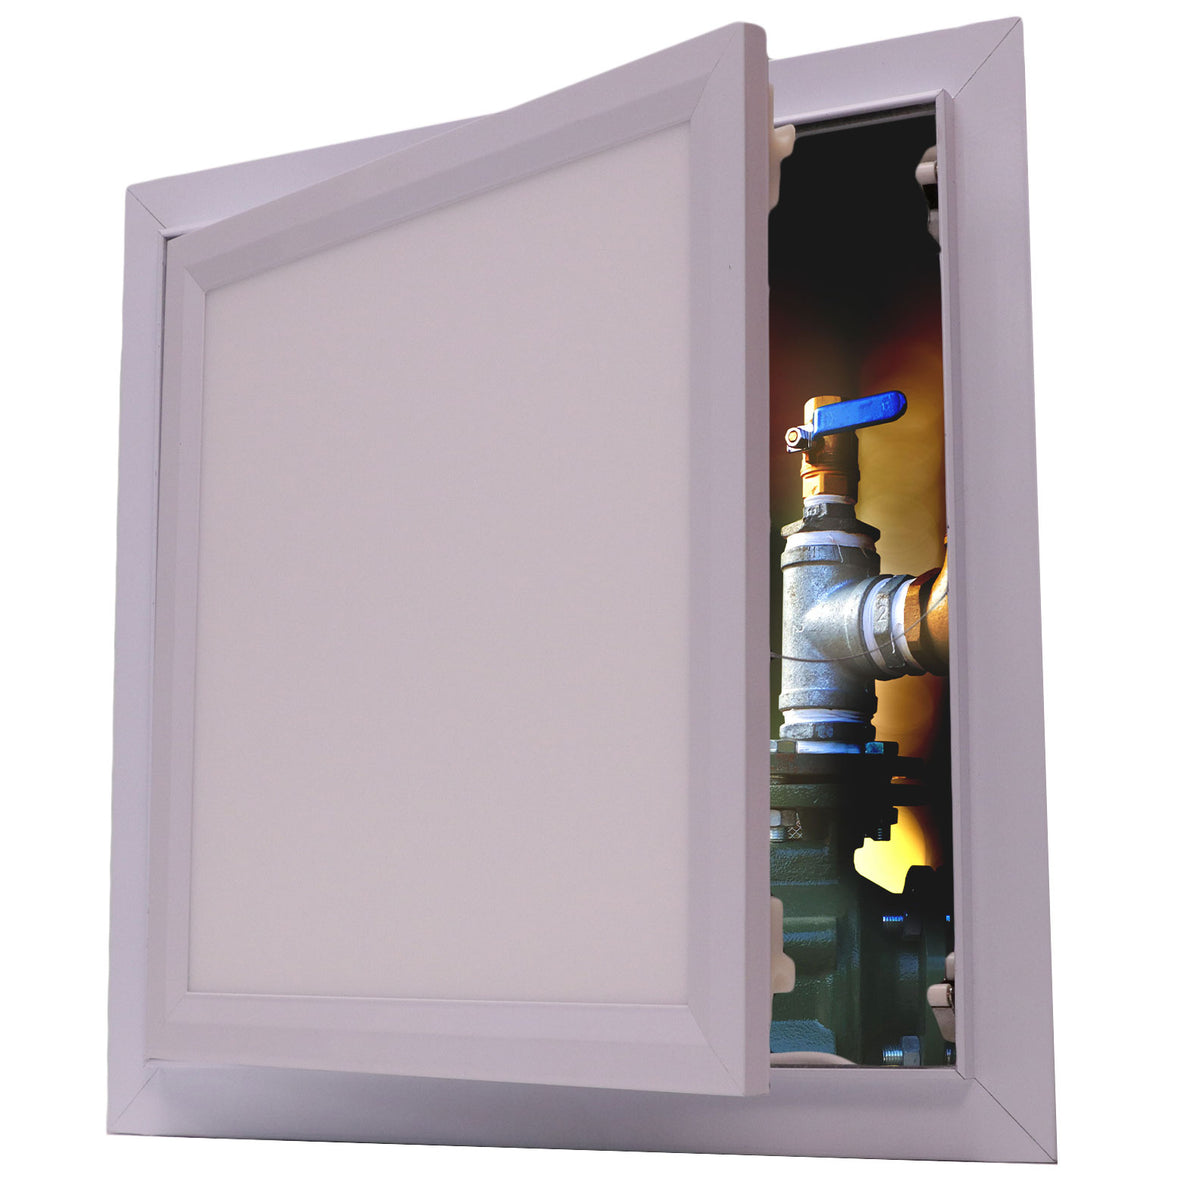 12&quot; X 24&quot; Aluminum LED Light Access Panel Door For Wall / Ceiling Application (Push-Lock) With Frame - [Outer Dimensions: 13&quot; Width X 25&quot; Height]